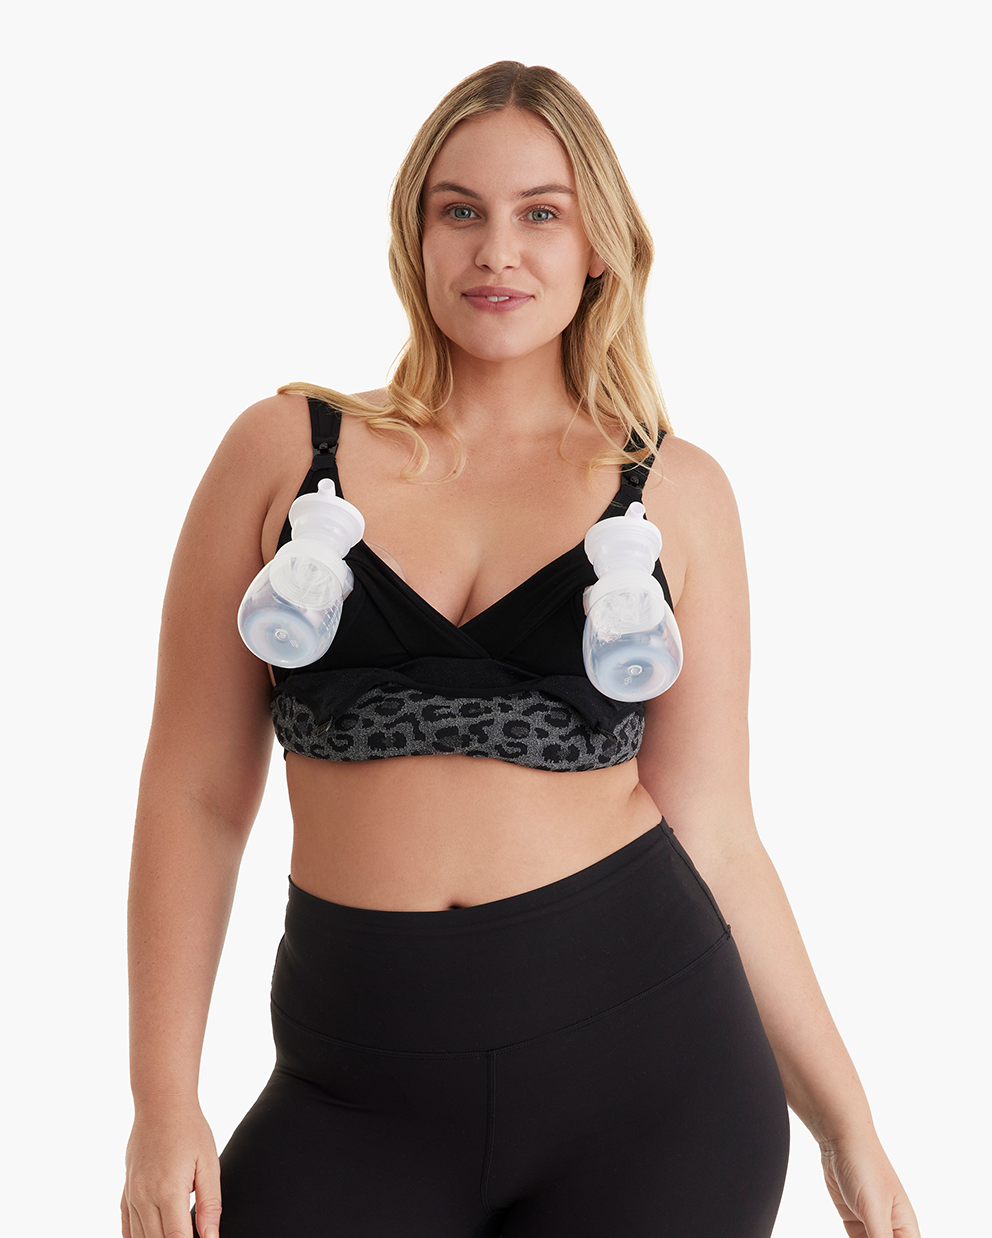 Momcozy The Essentials: Our Jelly Strip + Smooth + Dex - 4-in-1 Pumping Bra Bundle (3 Pack), S